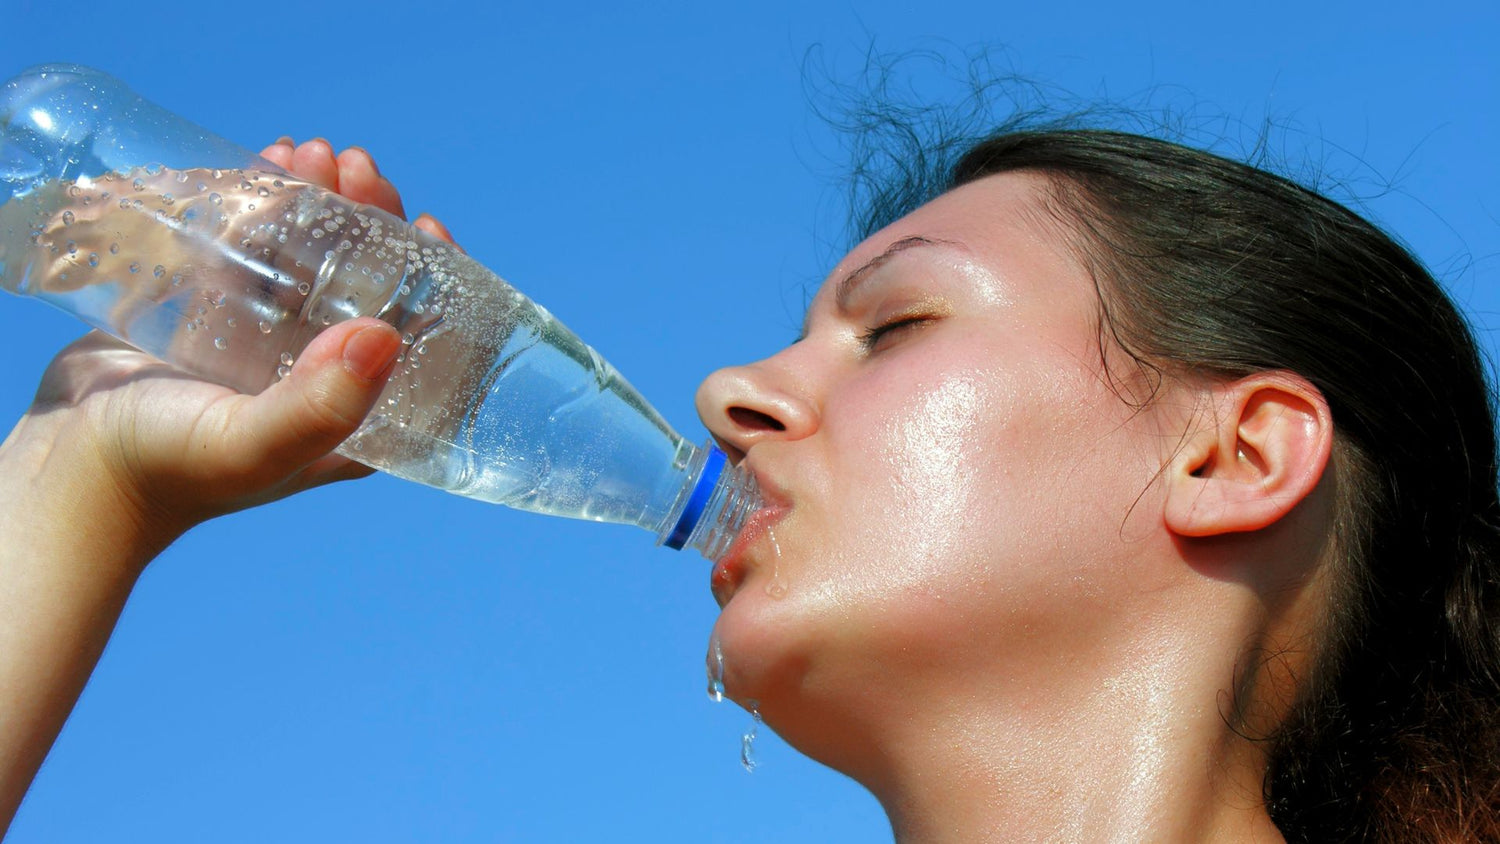 Woman drinking from bottle of water